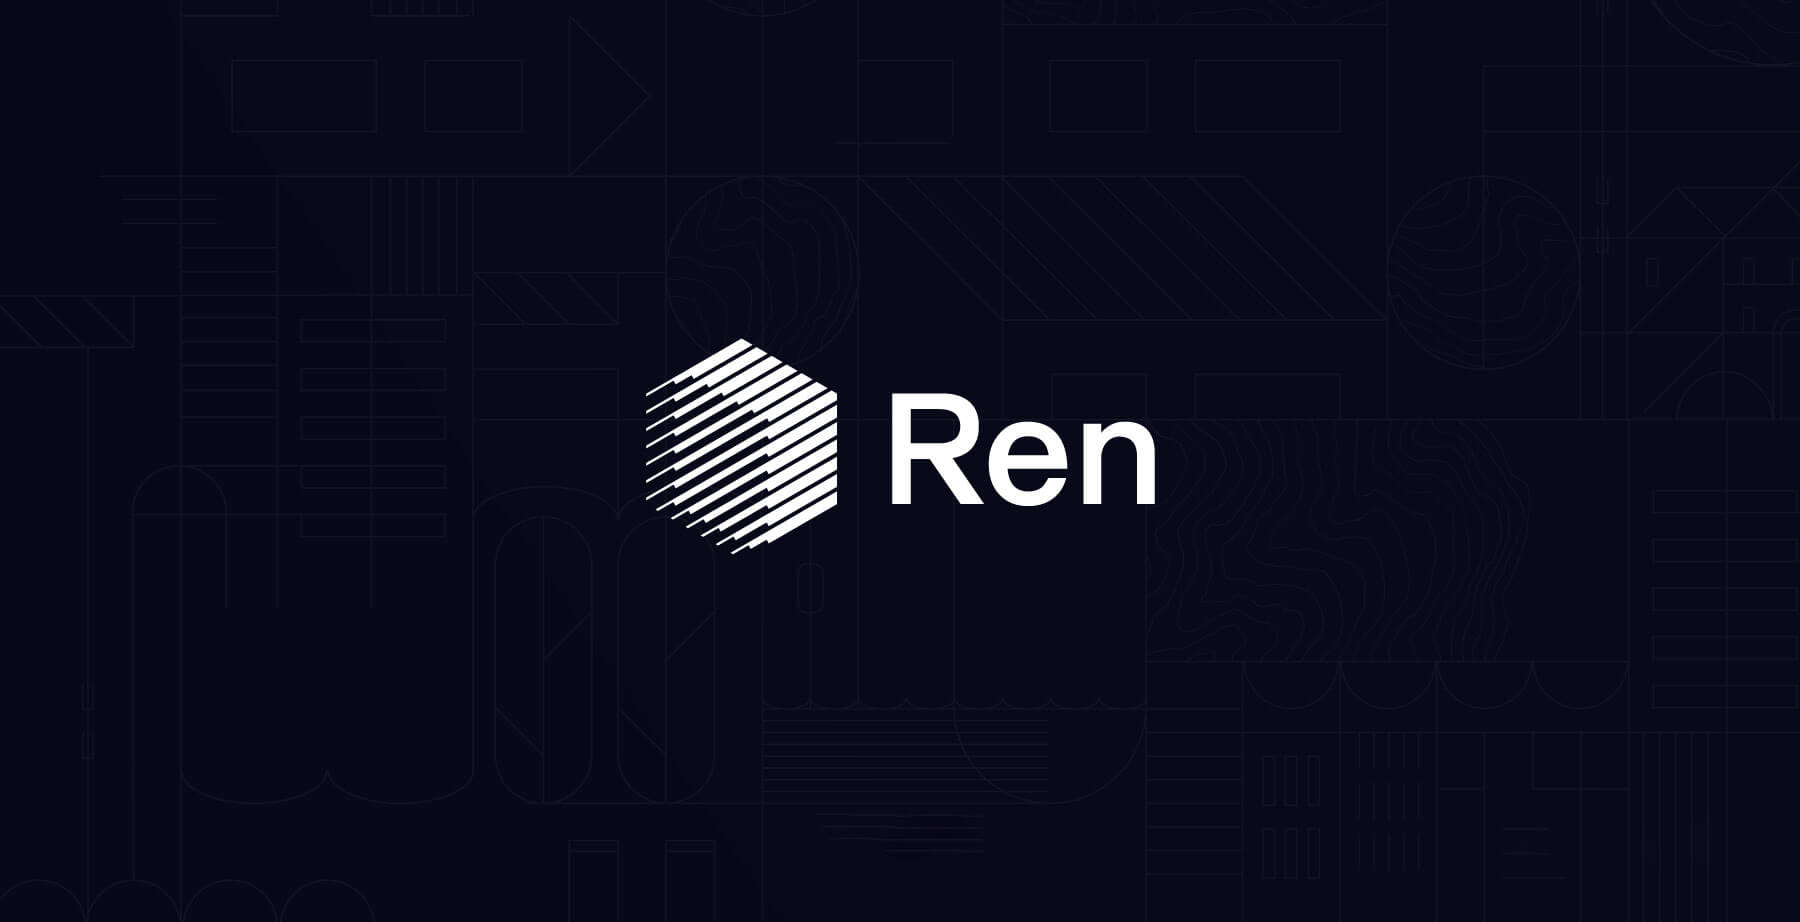 Introduction to Ren